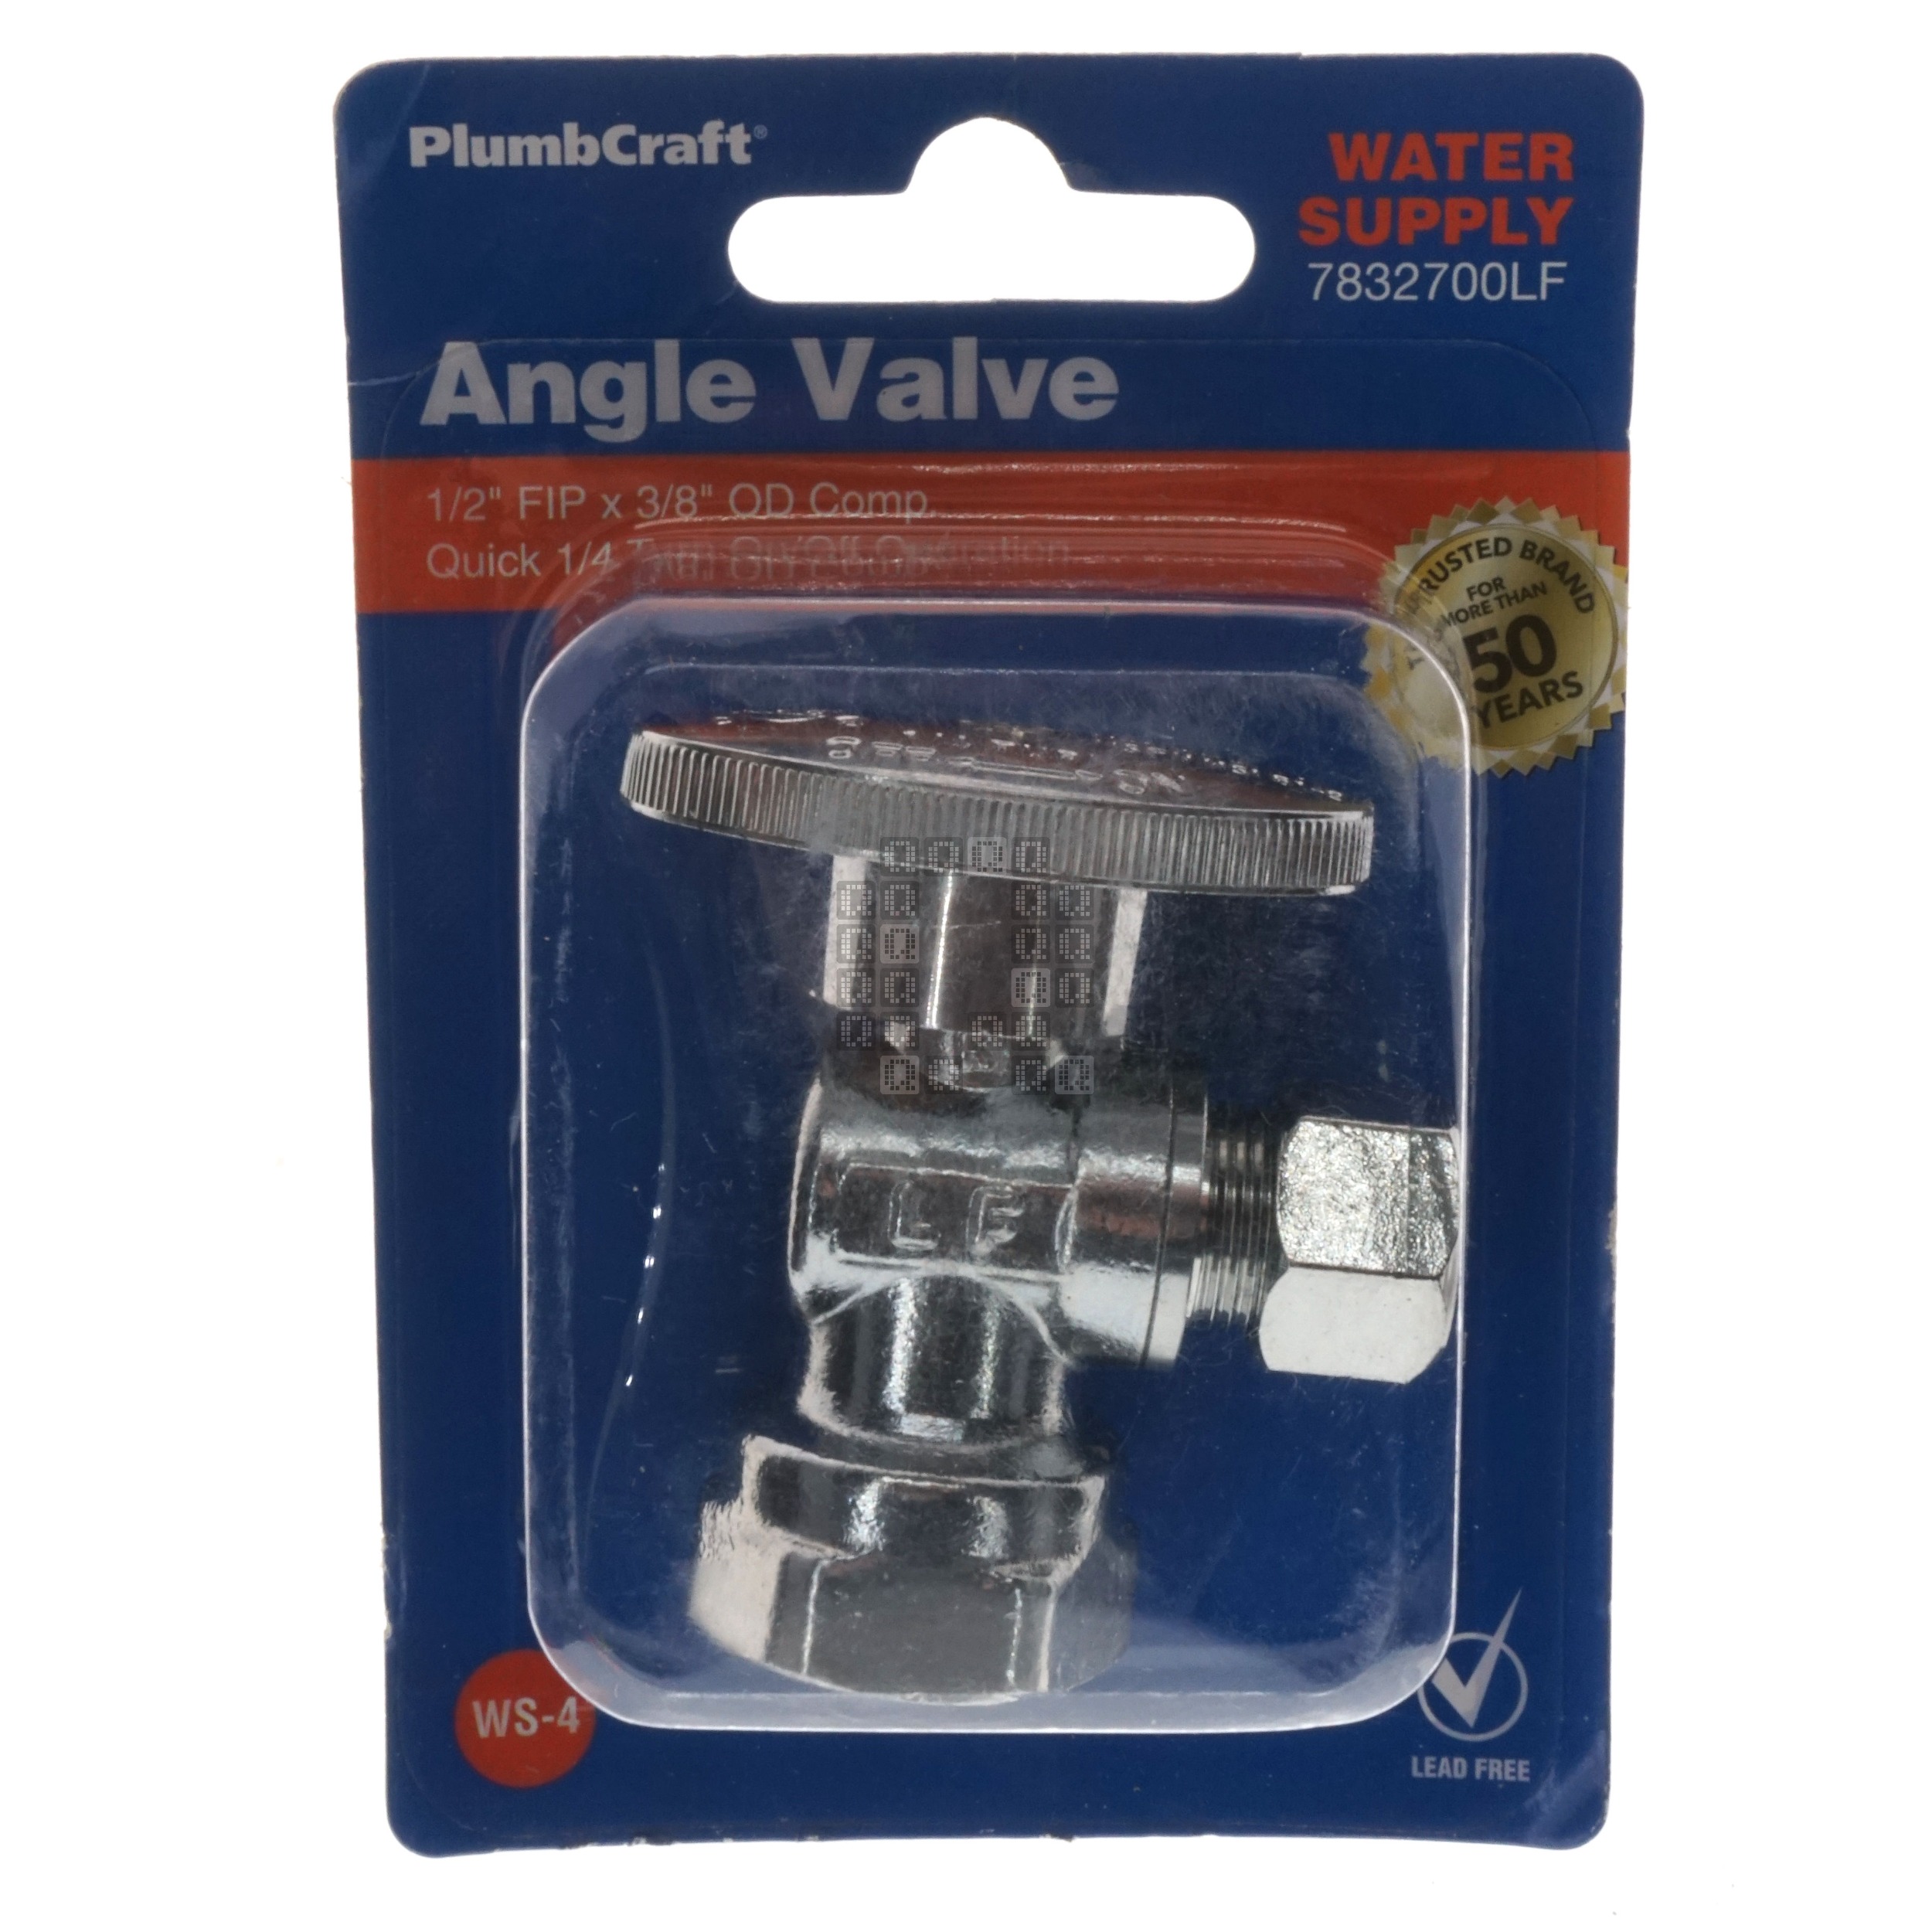 PlumbCraft 7832700LF Water Supply Angle Valve, 1/2" FIP x 3/8" OD Compression, Quick 1/4 Turn On/Off Operation